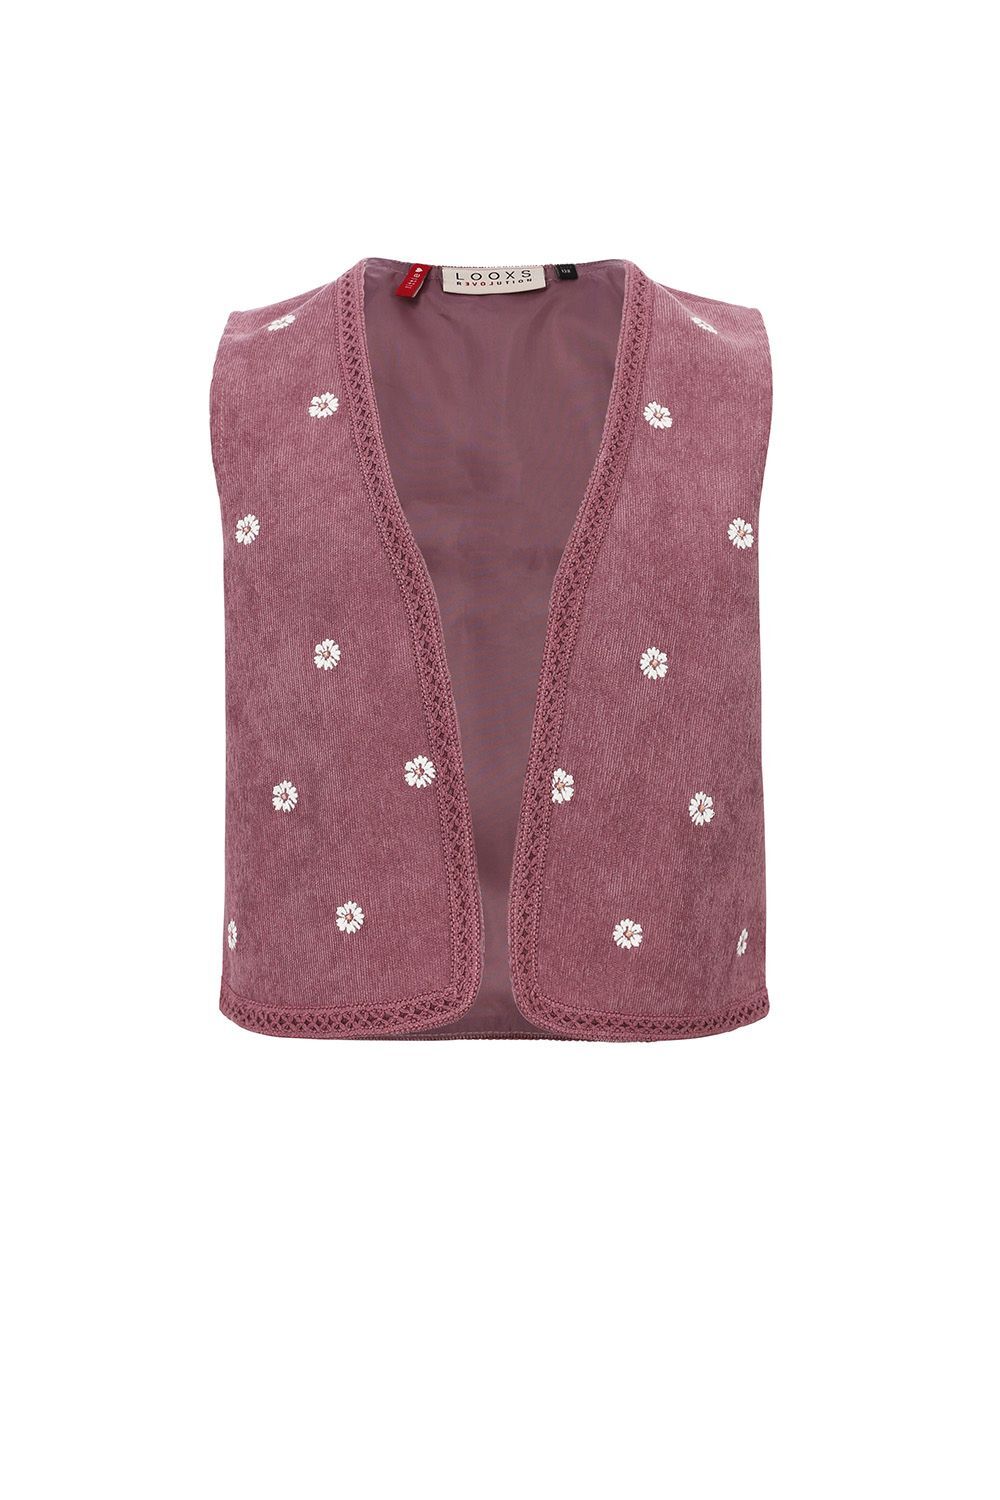 Little Looxs embroidered gilet